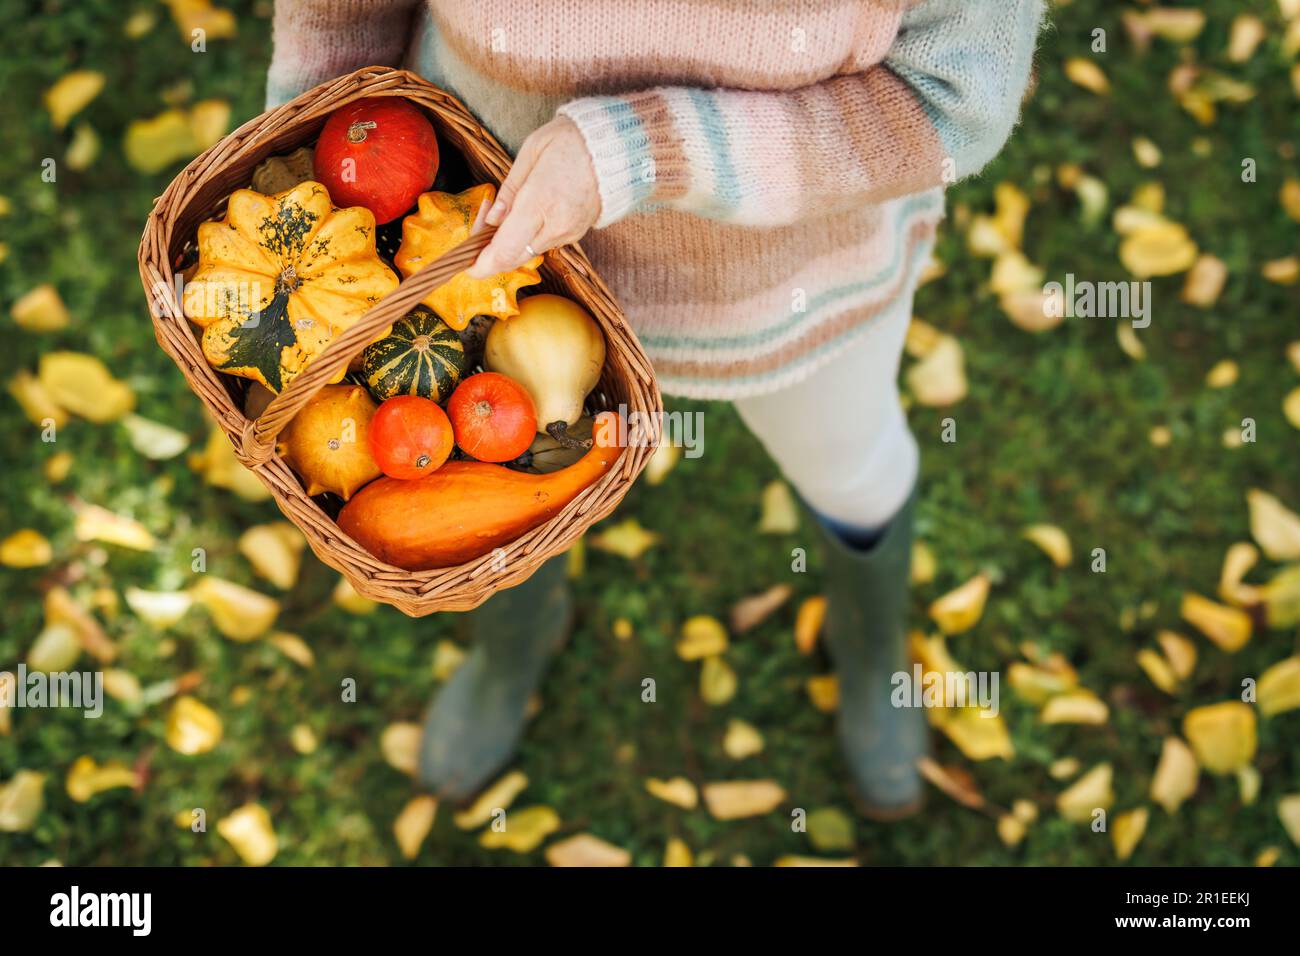 Farmer holding wicker basket with harvested pumpkins, gourd and squash. Autumn season in garden Stock Photo